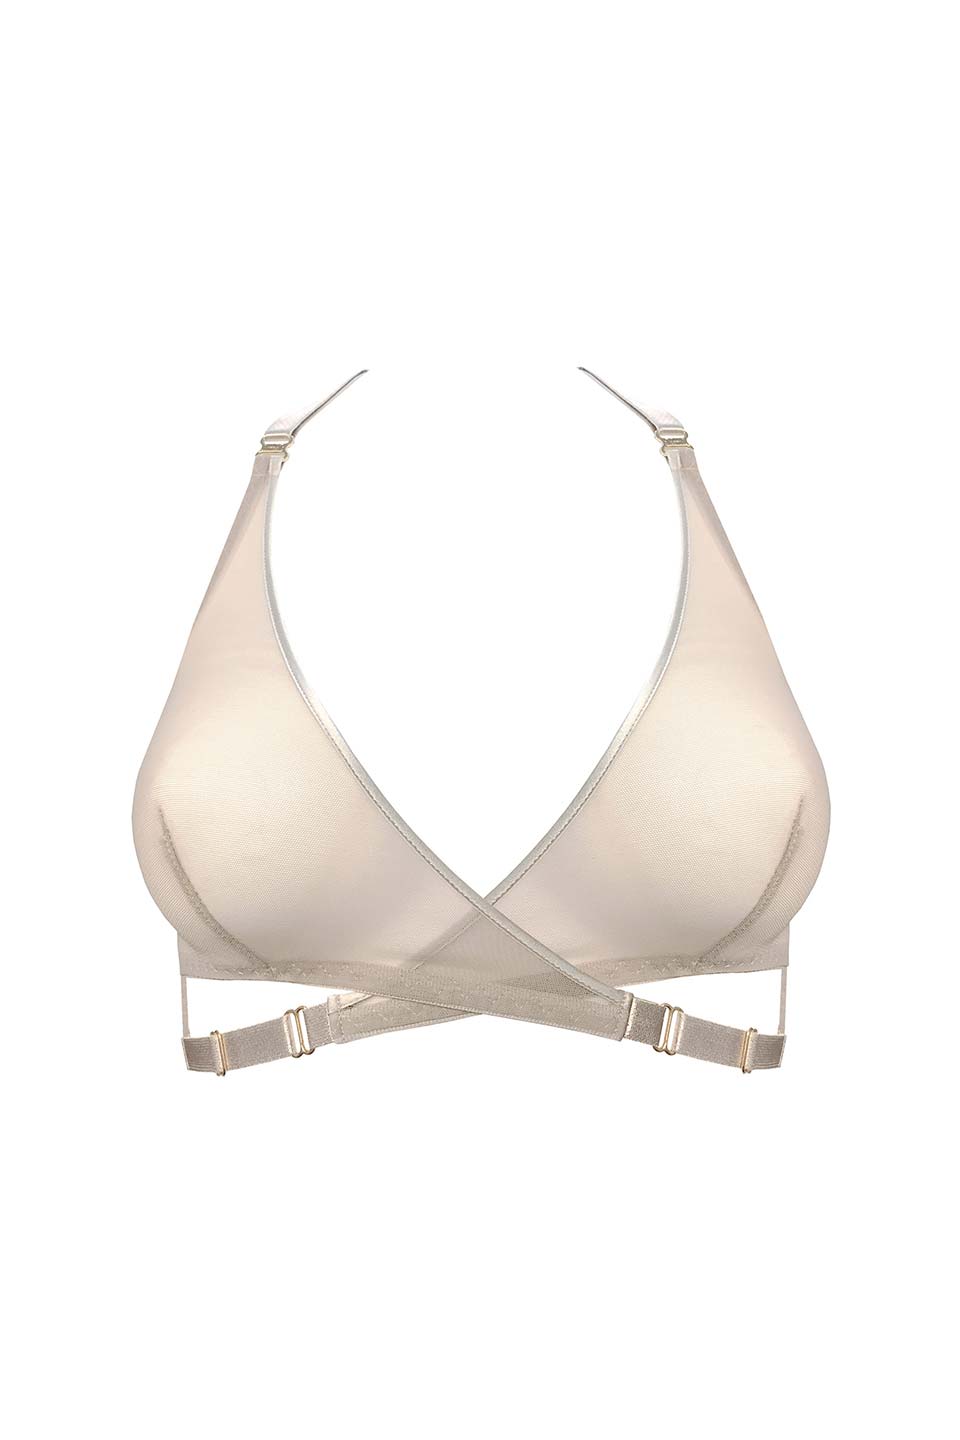 Thumbnail for Product gallery 1, Atelier Bordelle Art Deco Bra in camel color front view